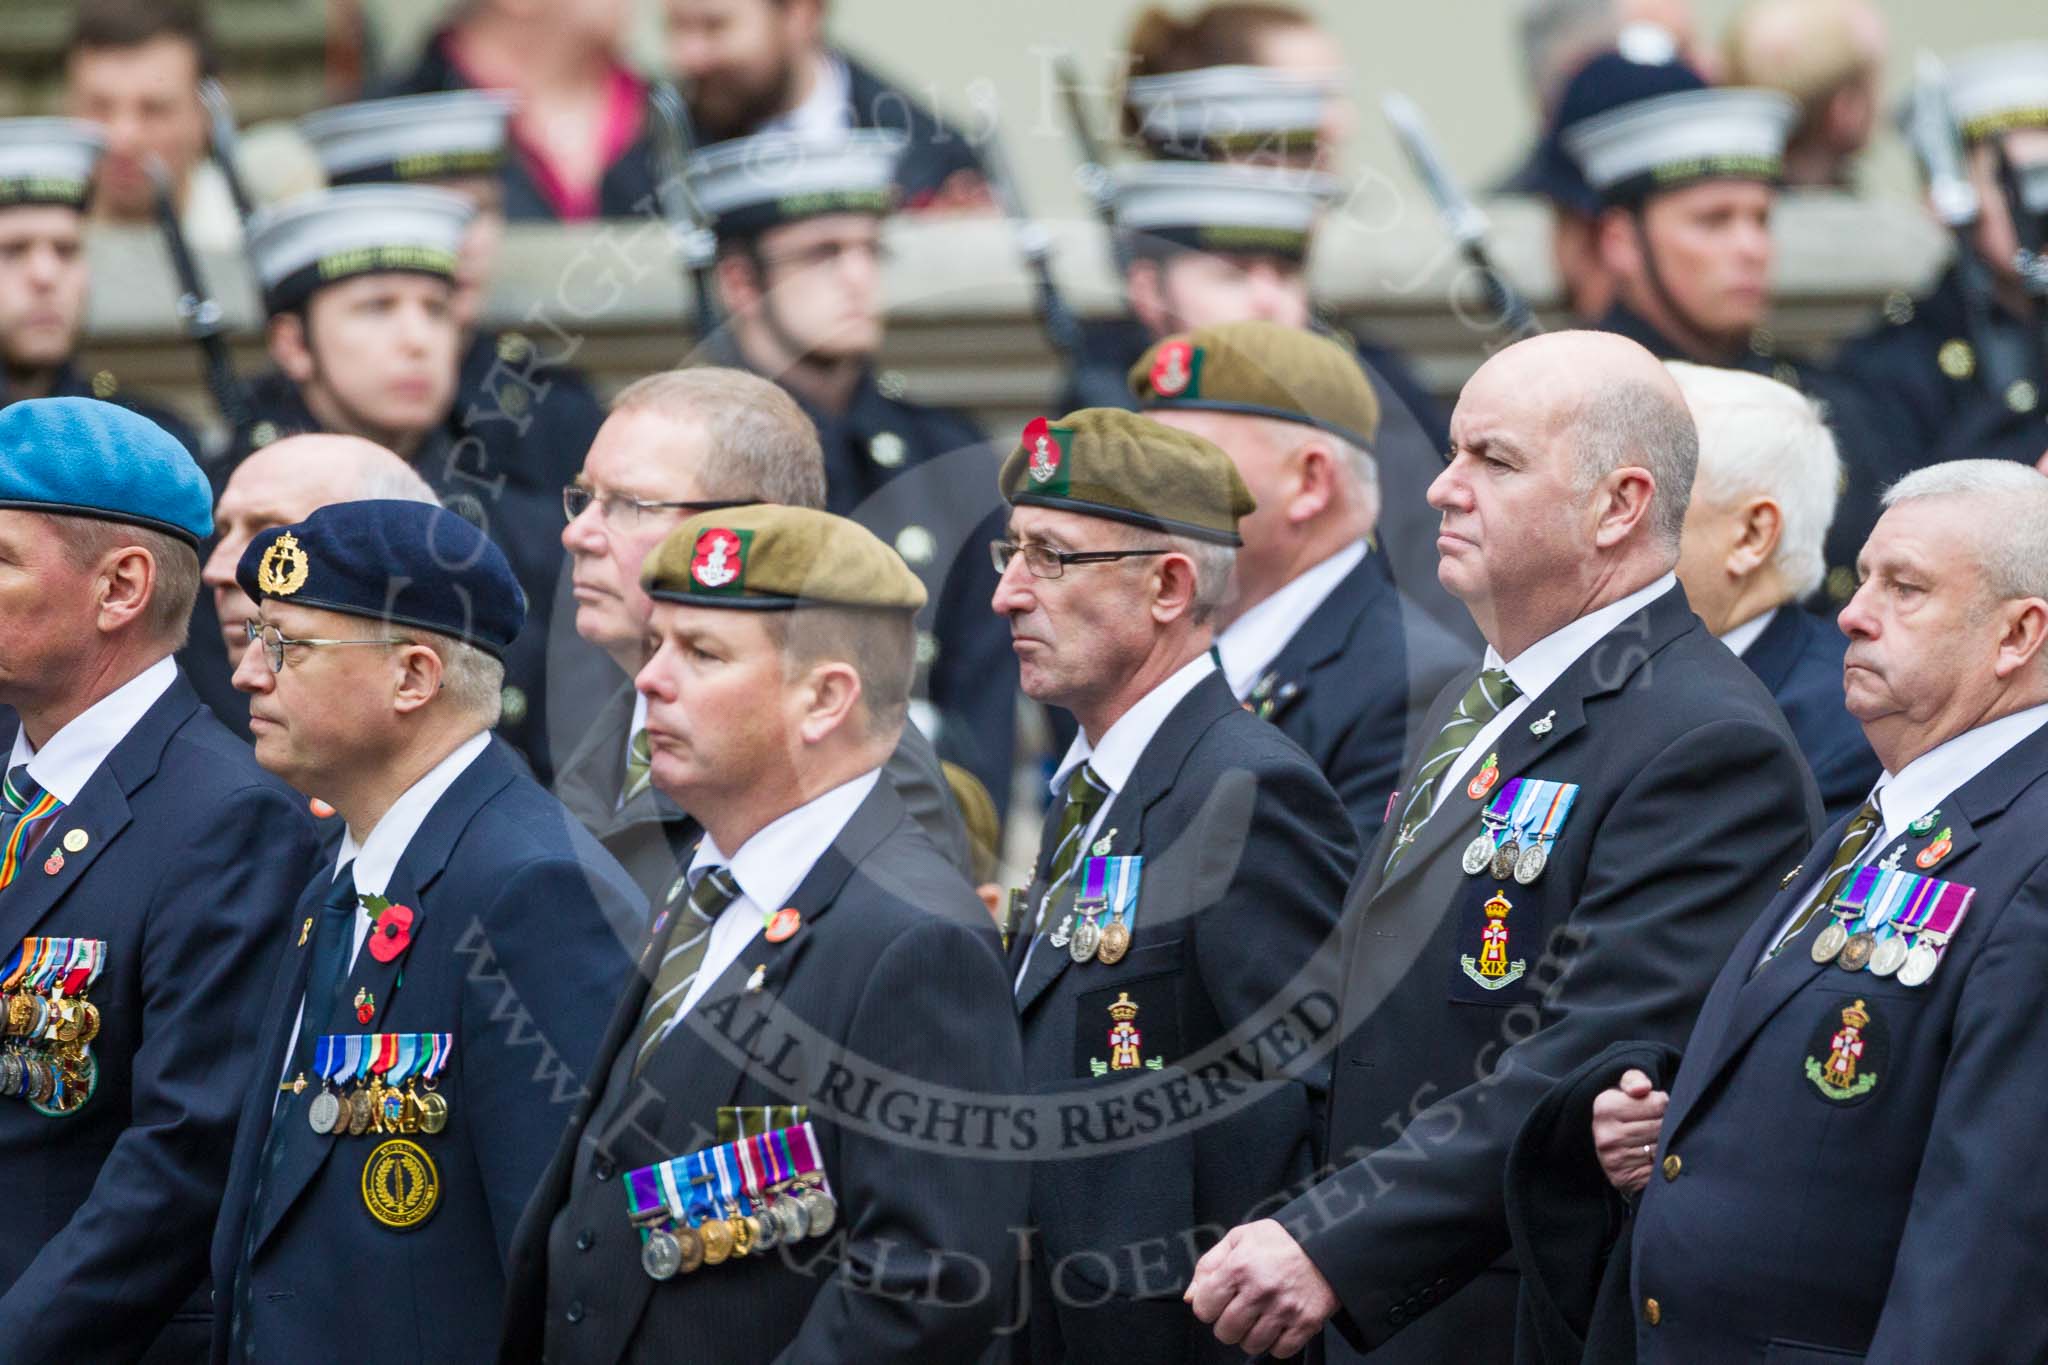 Remembrance Sunday at the Cenotaph 2015: Group A22, Green Howards Association.
Cenotaph, Whitehall, London SW1,
London,
Greater London,
United Kingdom,
on 08 November 2015 at 12:12, image #1346